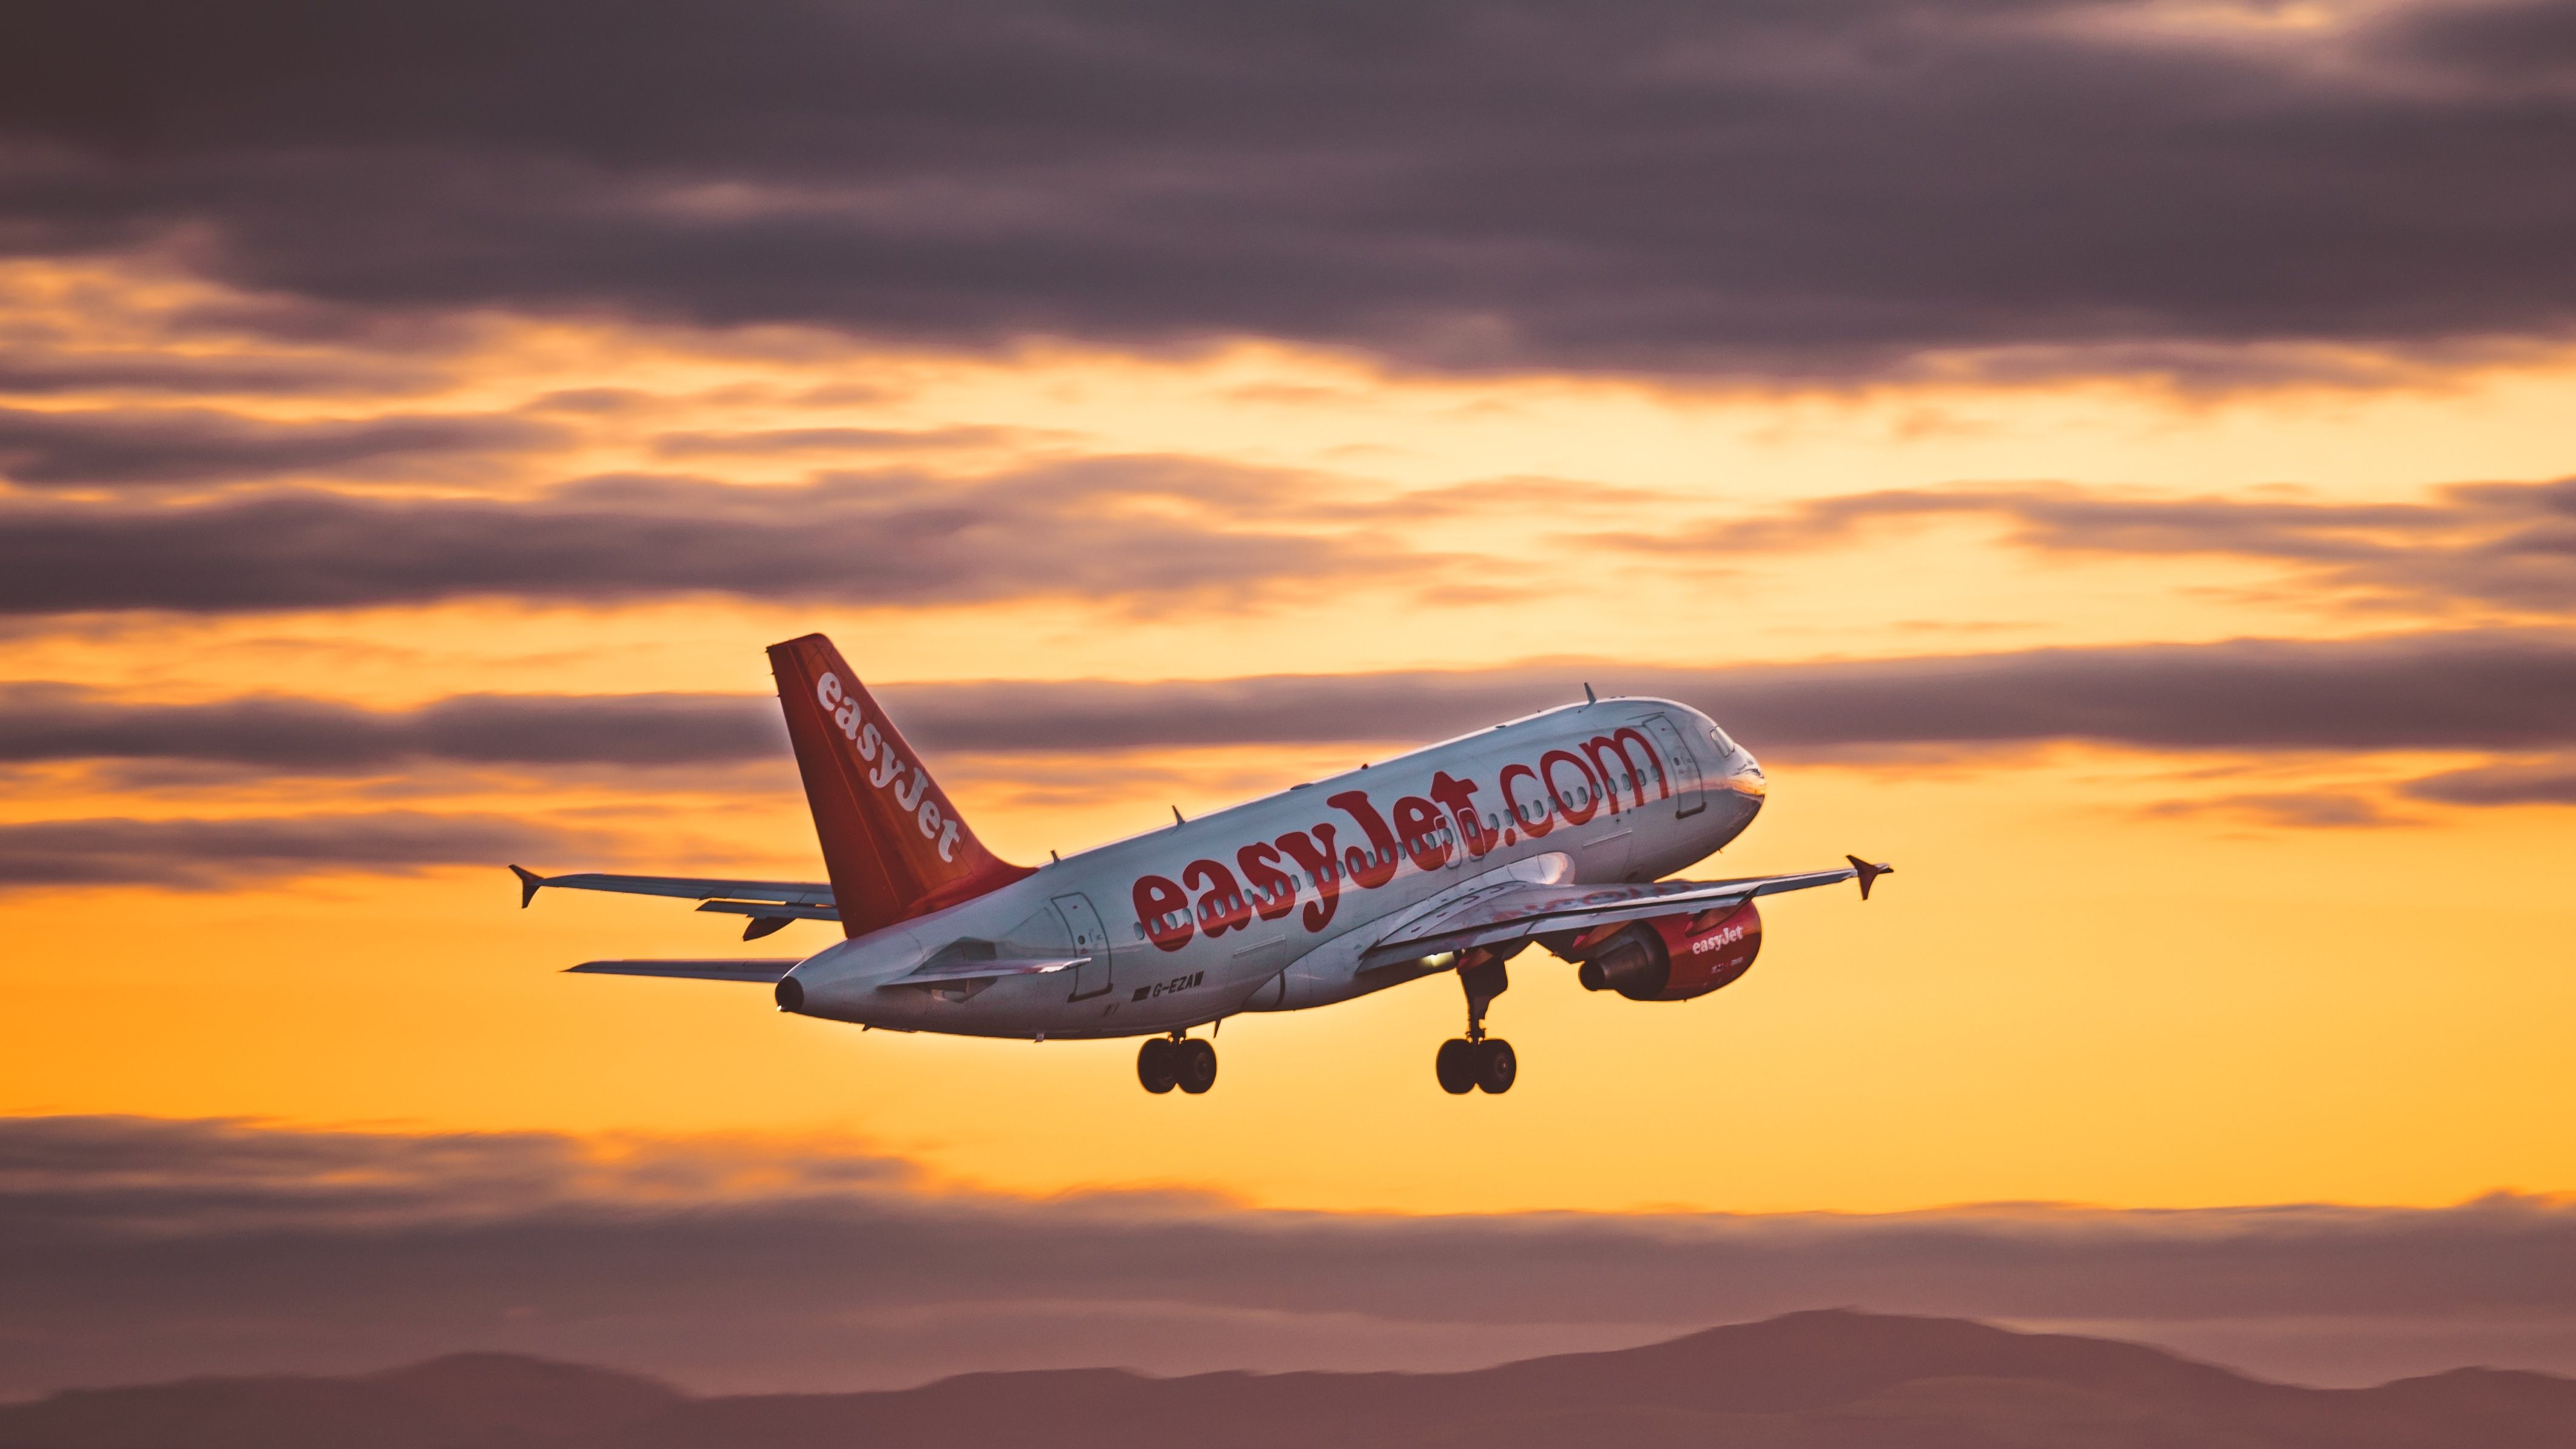 An easyJet Airbus A320 just after takeoff at sunset.